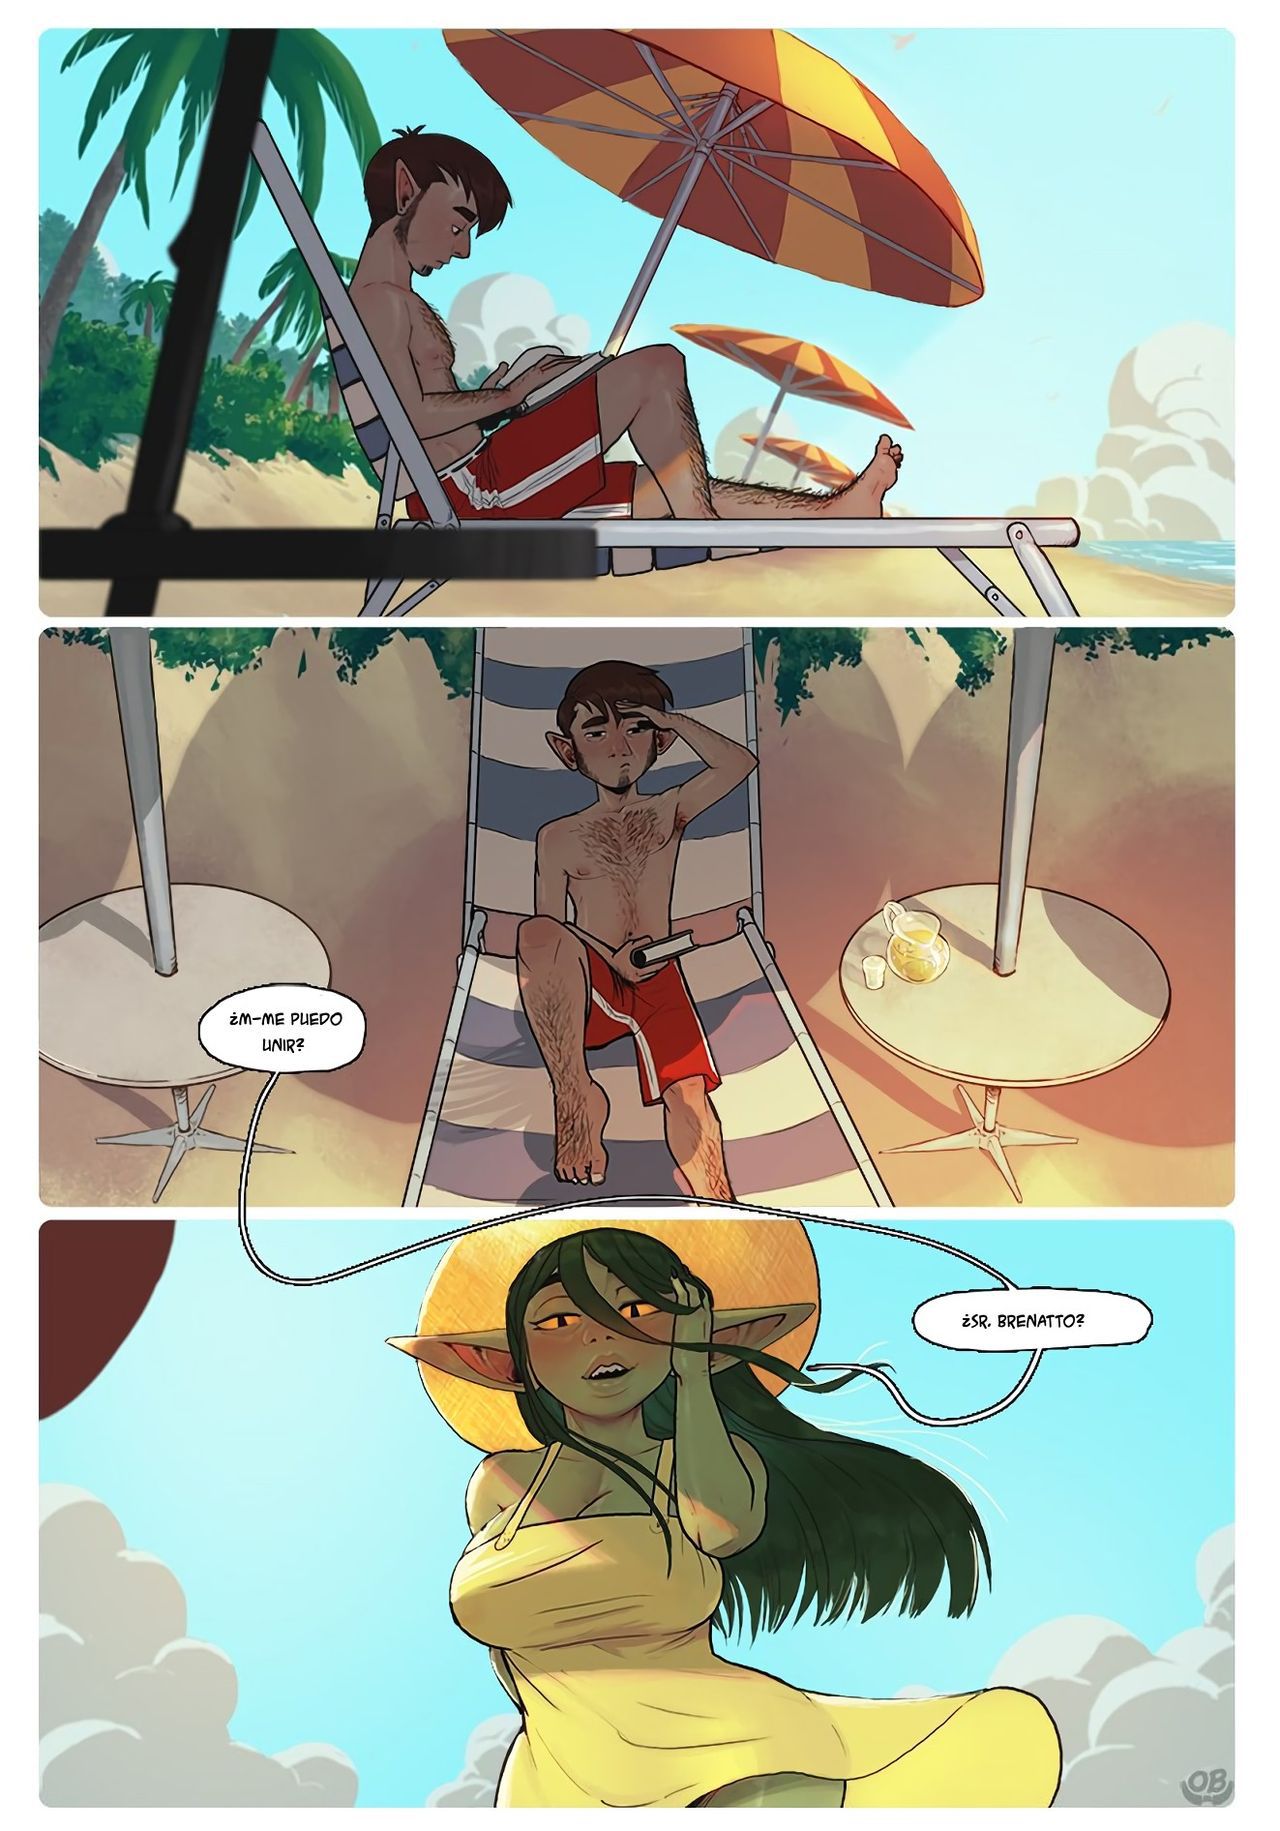 [Orcbarbies] Beach Day in Xhorhas [Ongoing] [Spanish] 2